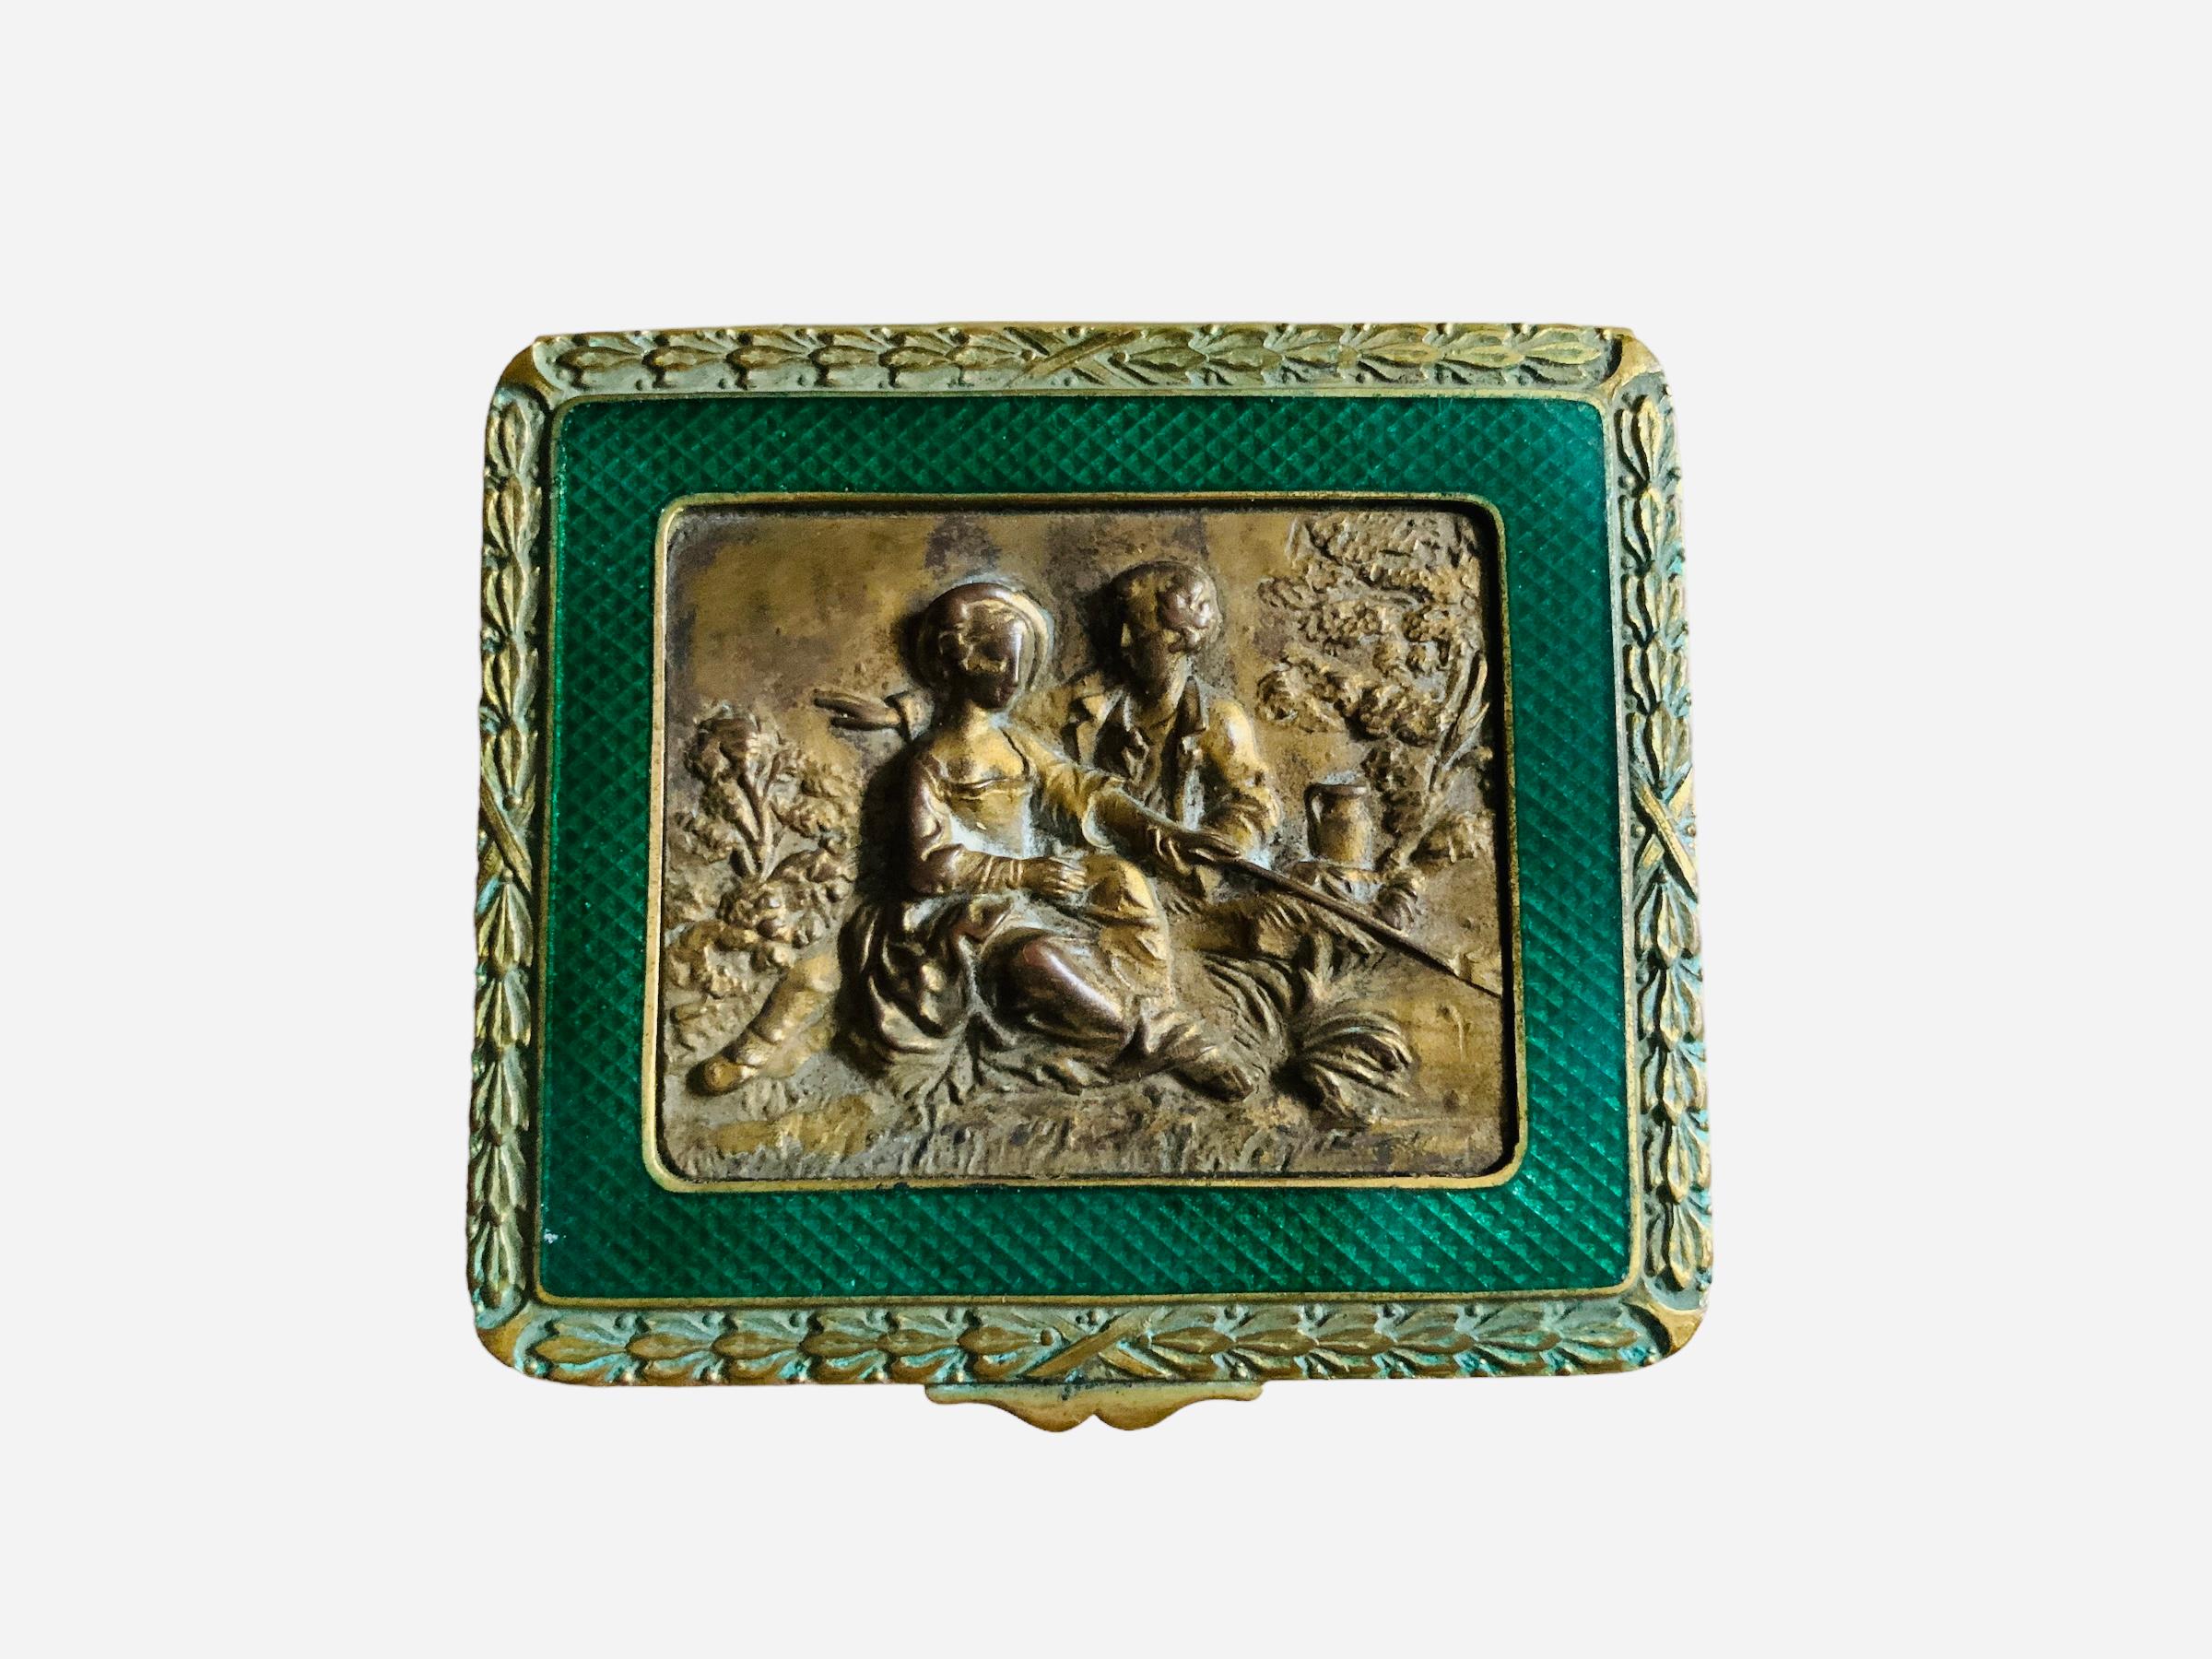 This is a French bronze metal square hinged lidded box. It depicts a lid decorated with an 19th century country relief scene of a romantic couple. The gentleman is hugging a lady while they are seated in the grass beside a tree. The relief is